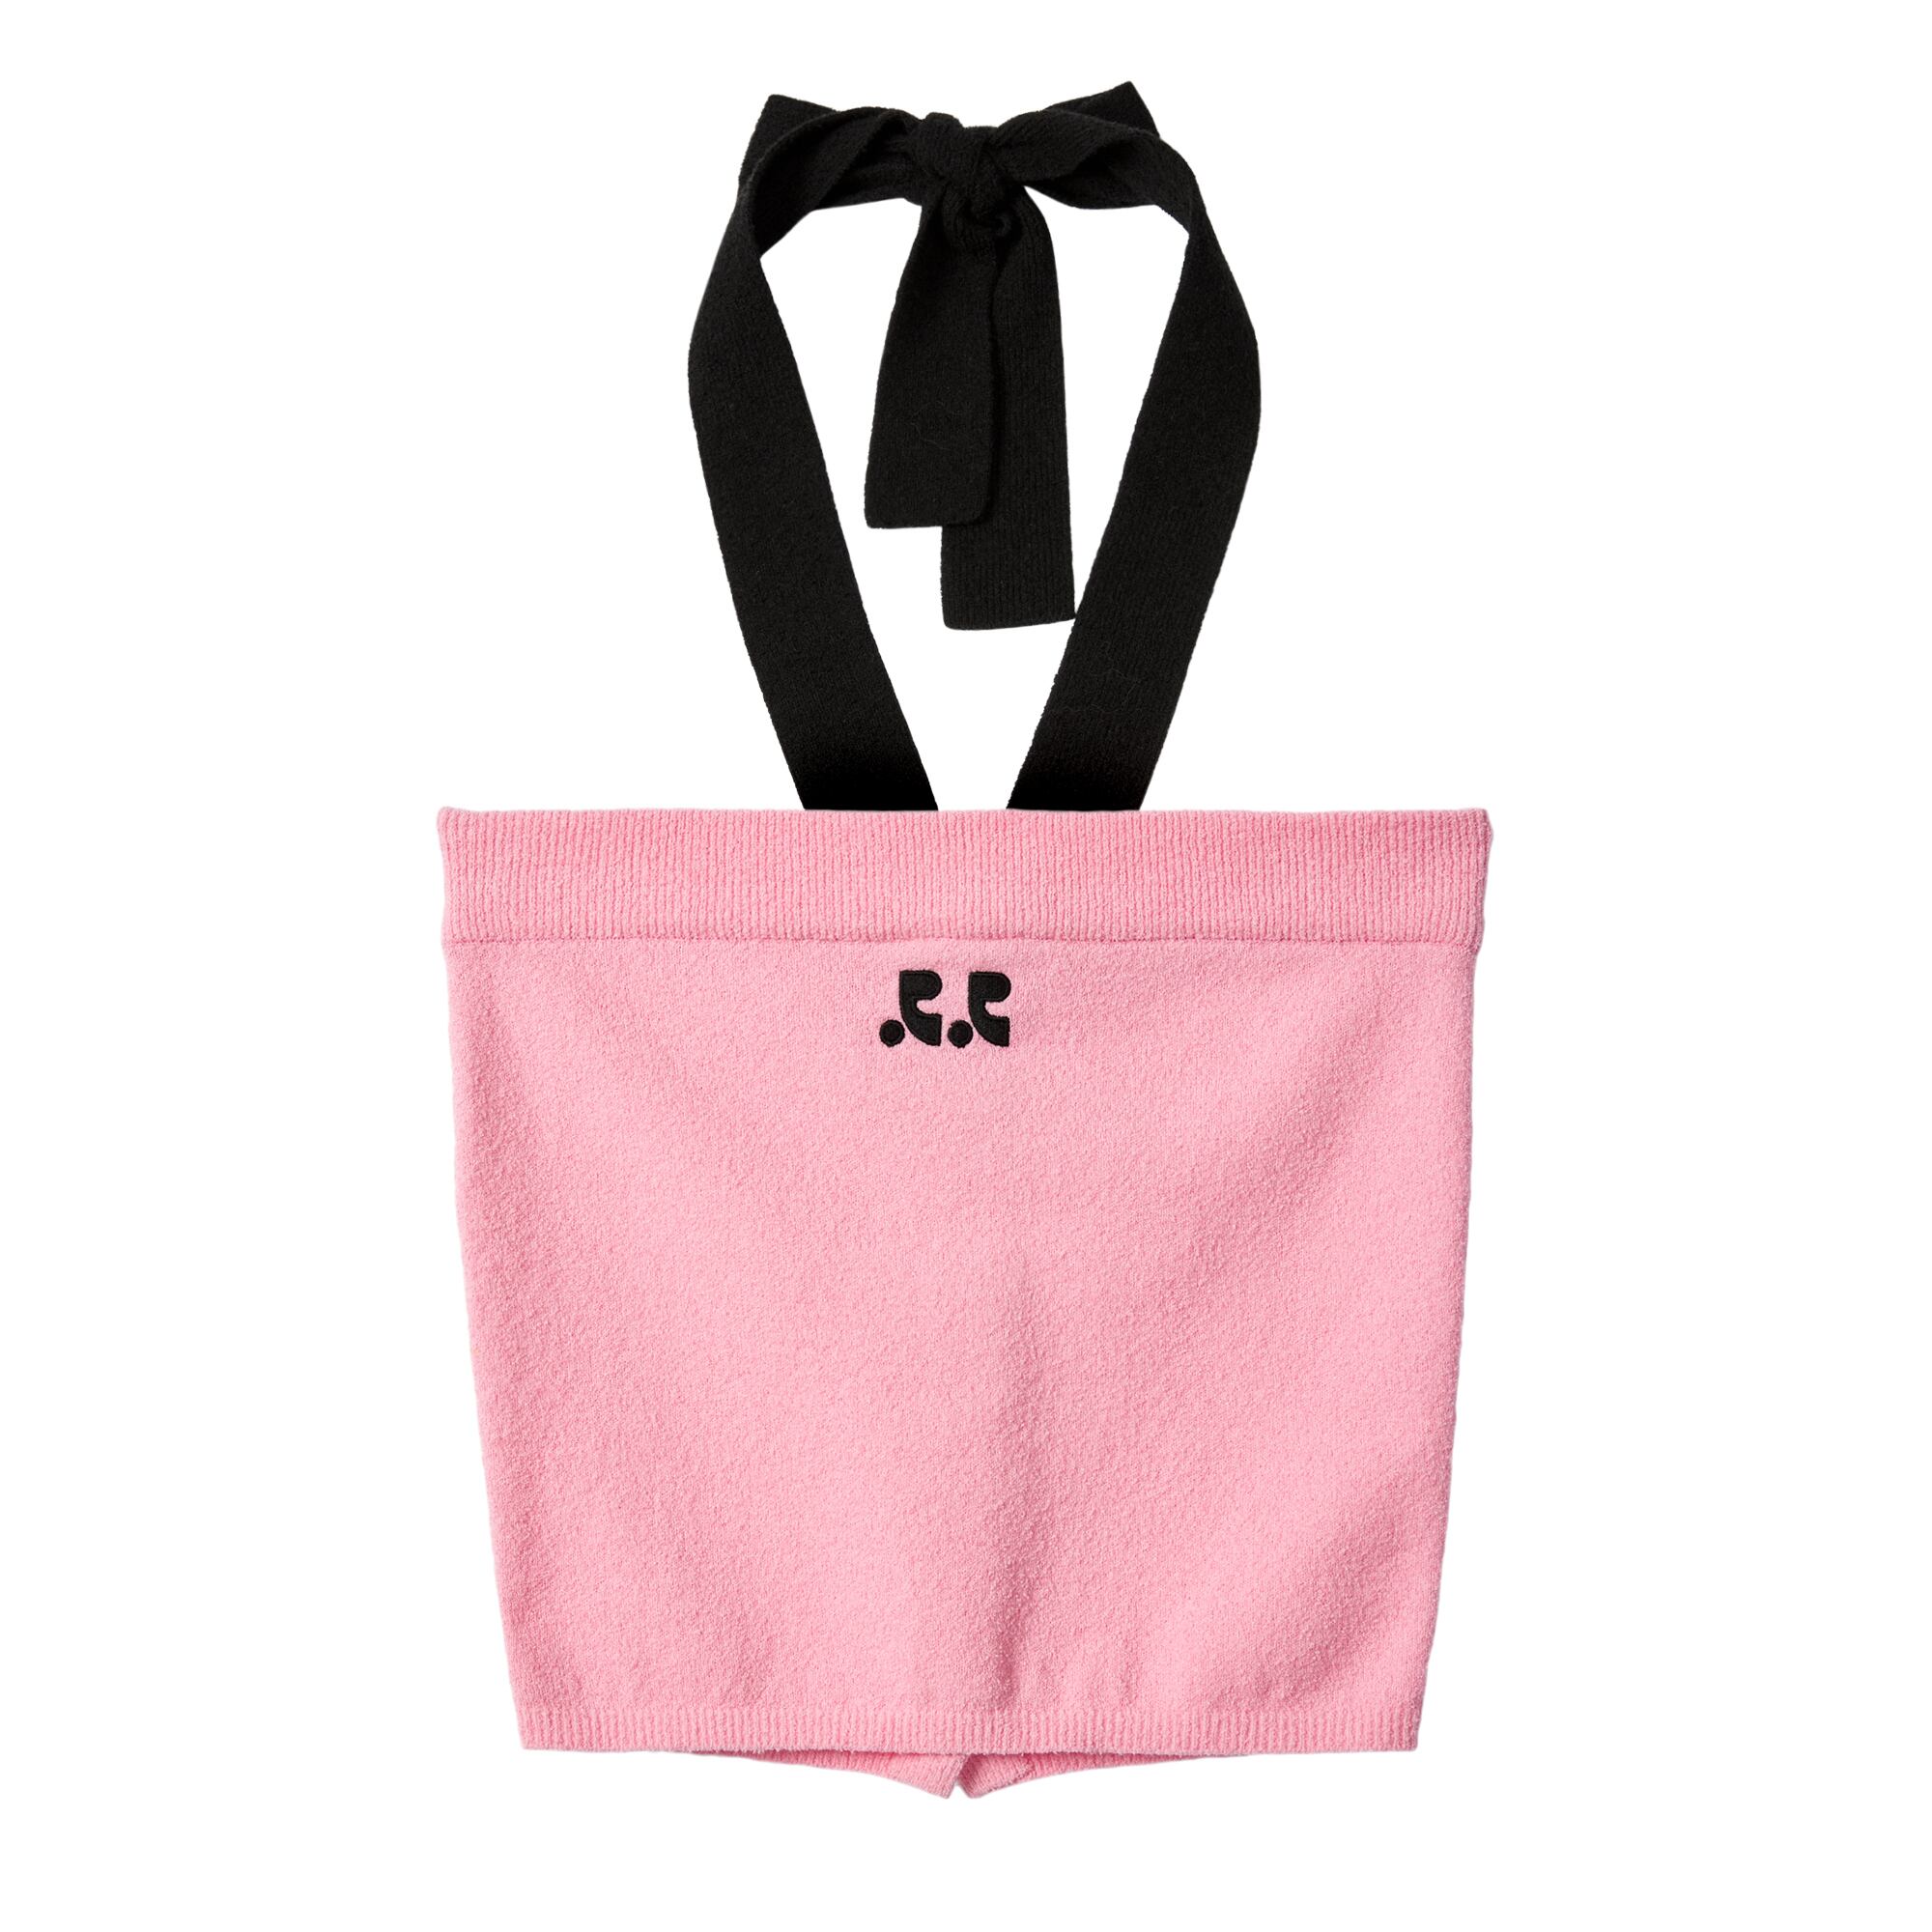 rest & recreation] RR LOGO KNIT TUBE TOP - PINK 正規韓国ブランド